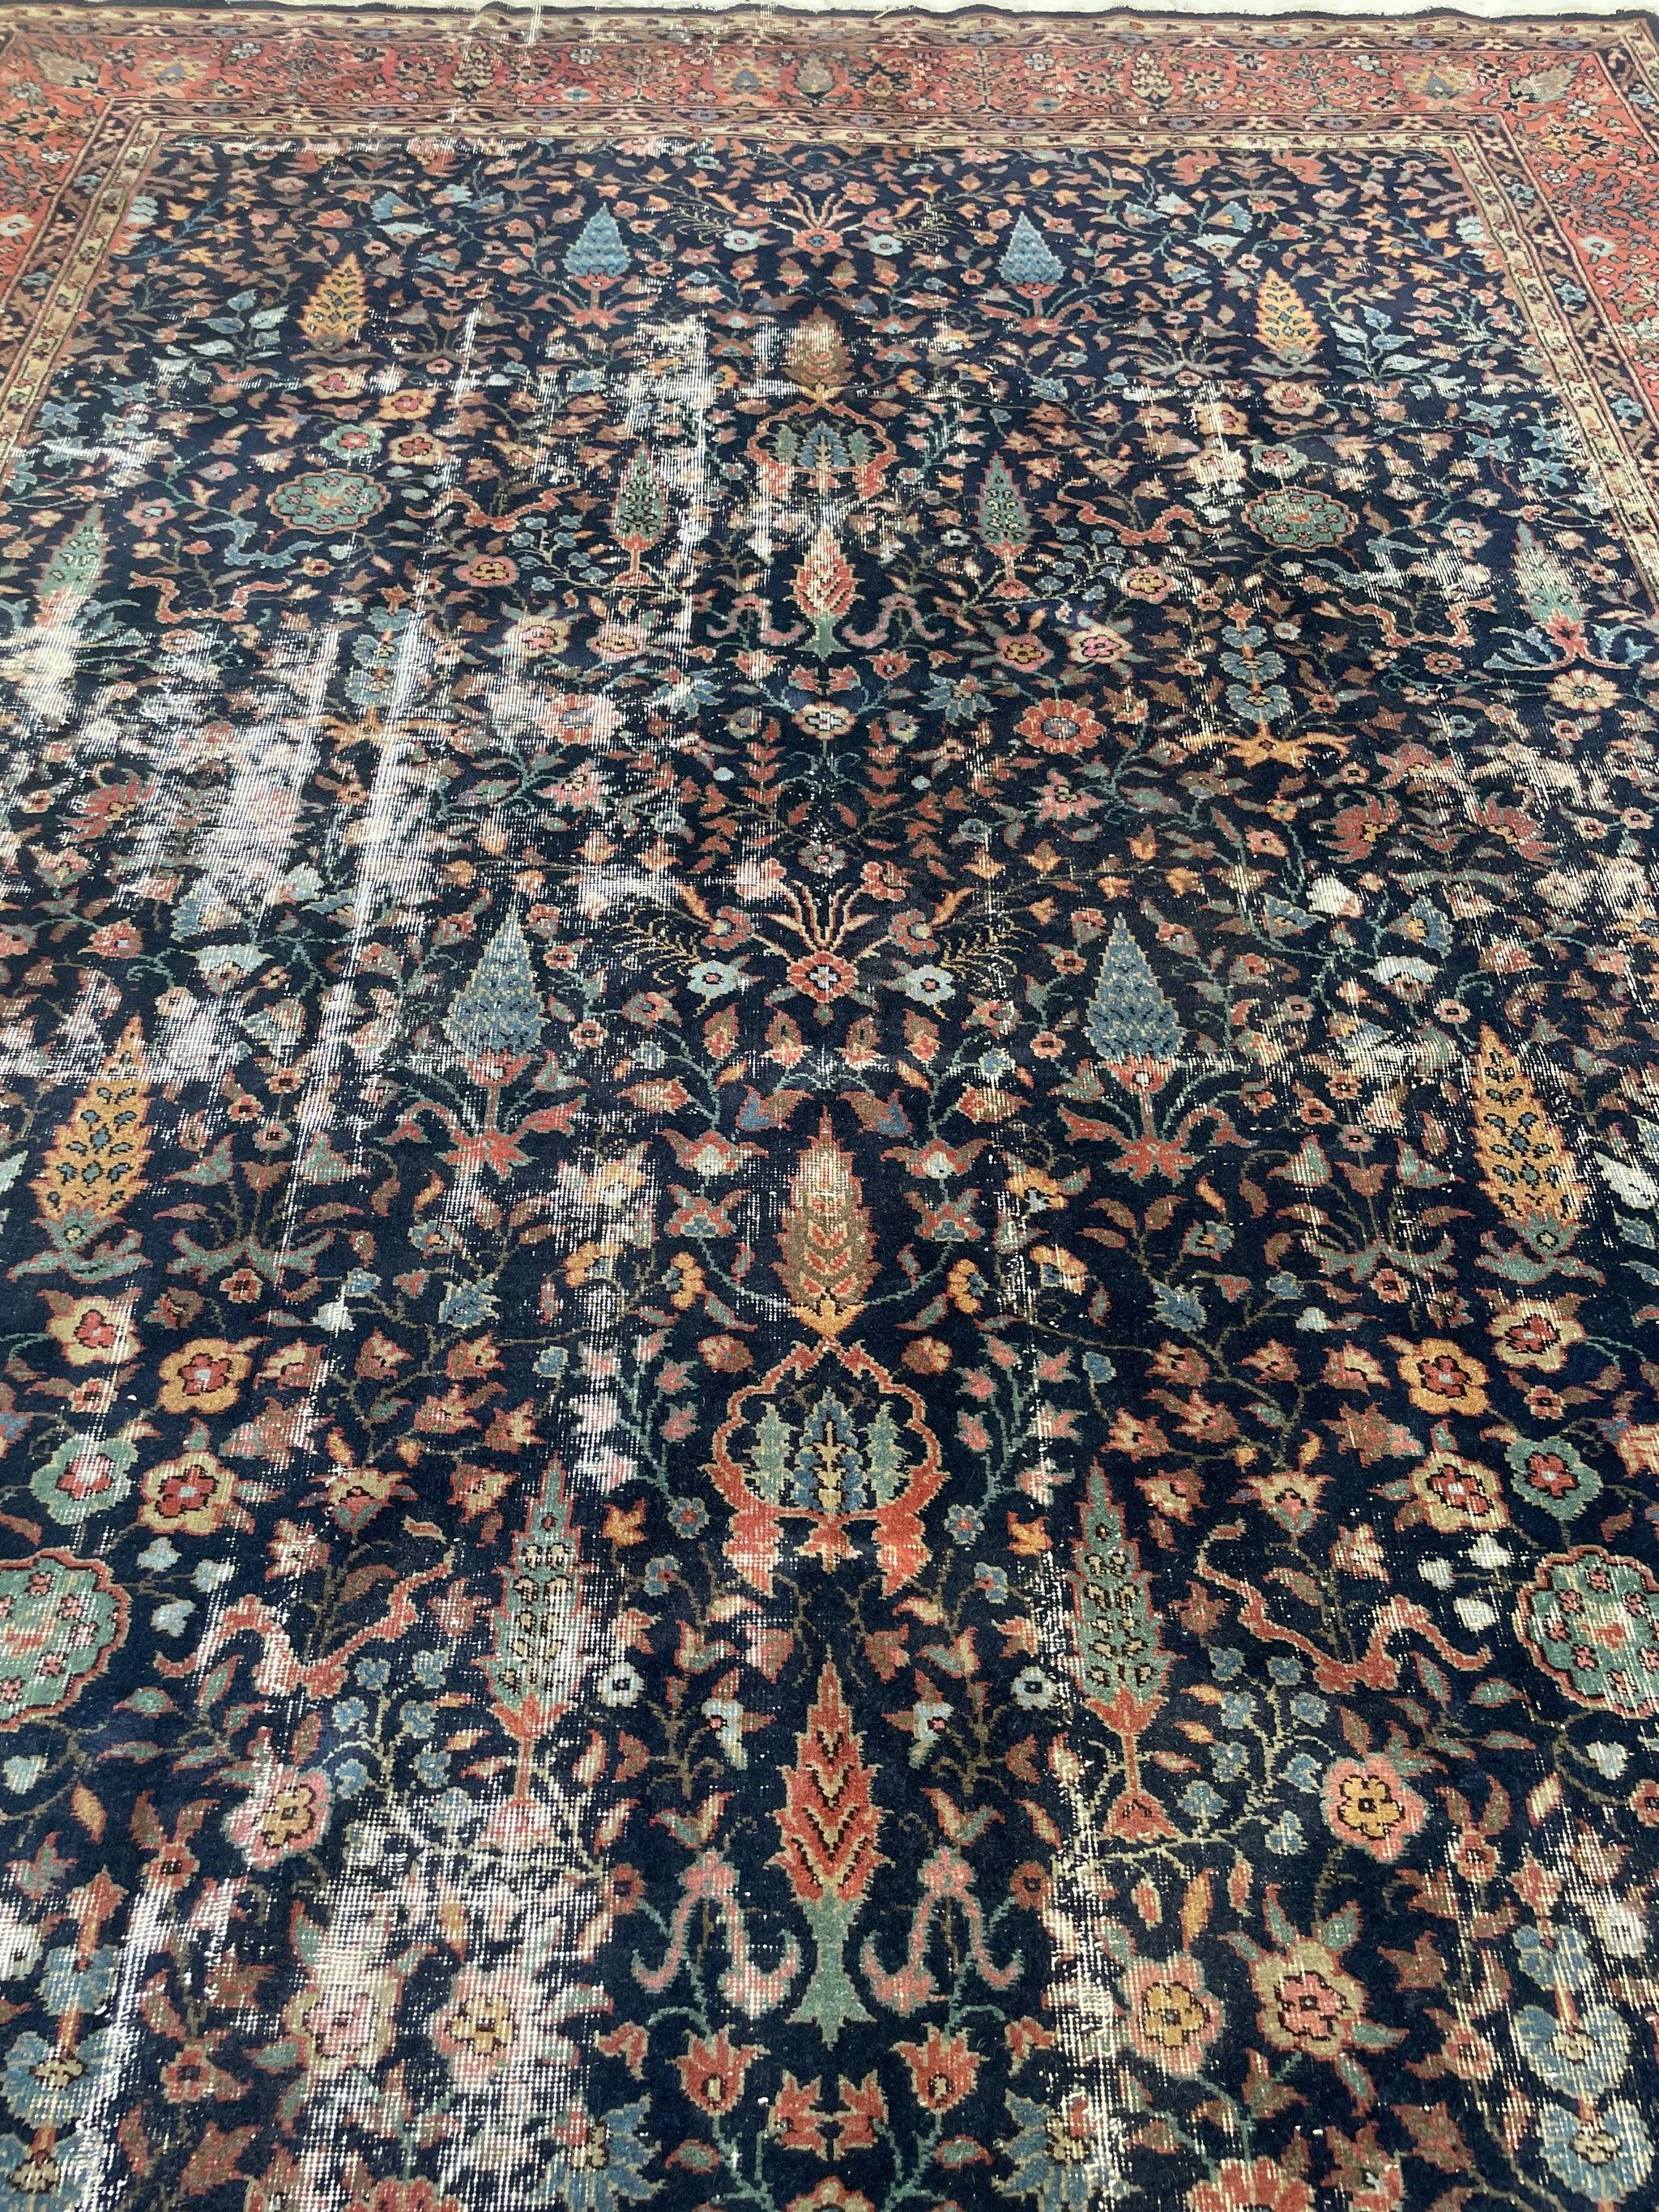 Rare Size & Gorgeous Vintage Turkish Garden Carpet  Cypres Forest of Life in Greens, Saffrons Blues & Rust

About: Influenced by the most beautiful GARDEN COURT CARPETS woven back in the day for Roylaty and the Aristicraptes of the times. 

Size: